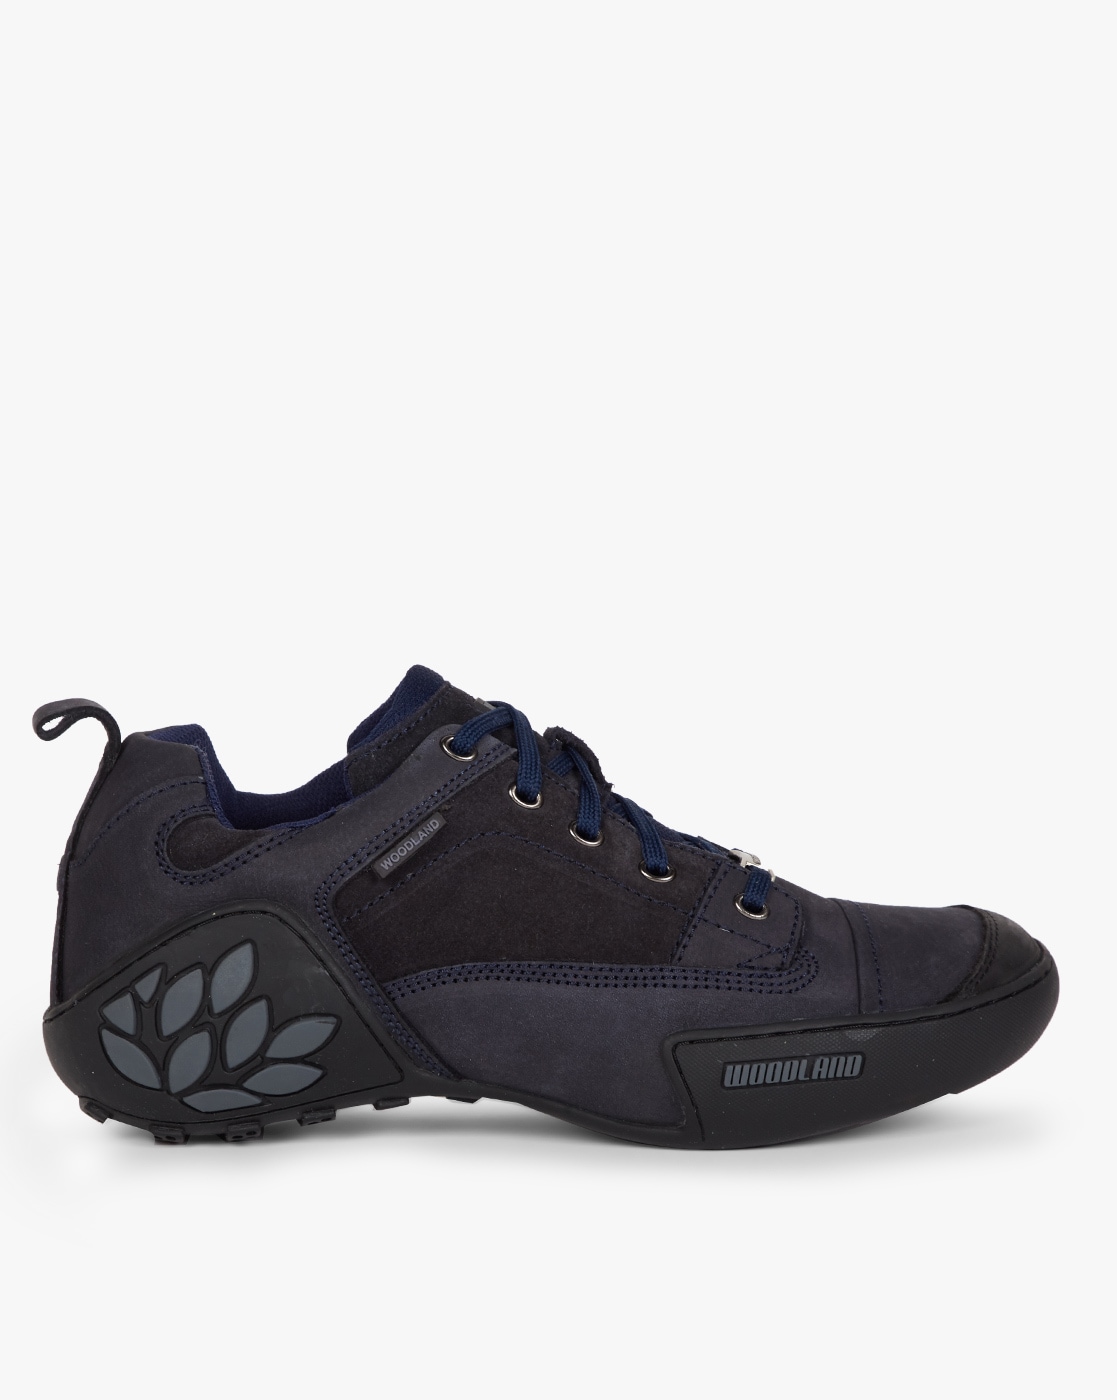 woodland navy blue casual shoes